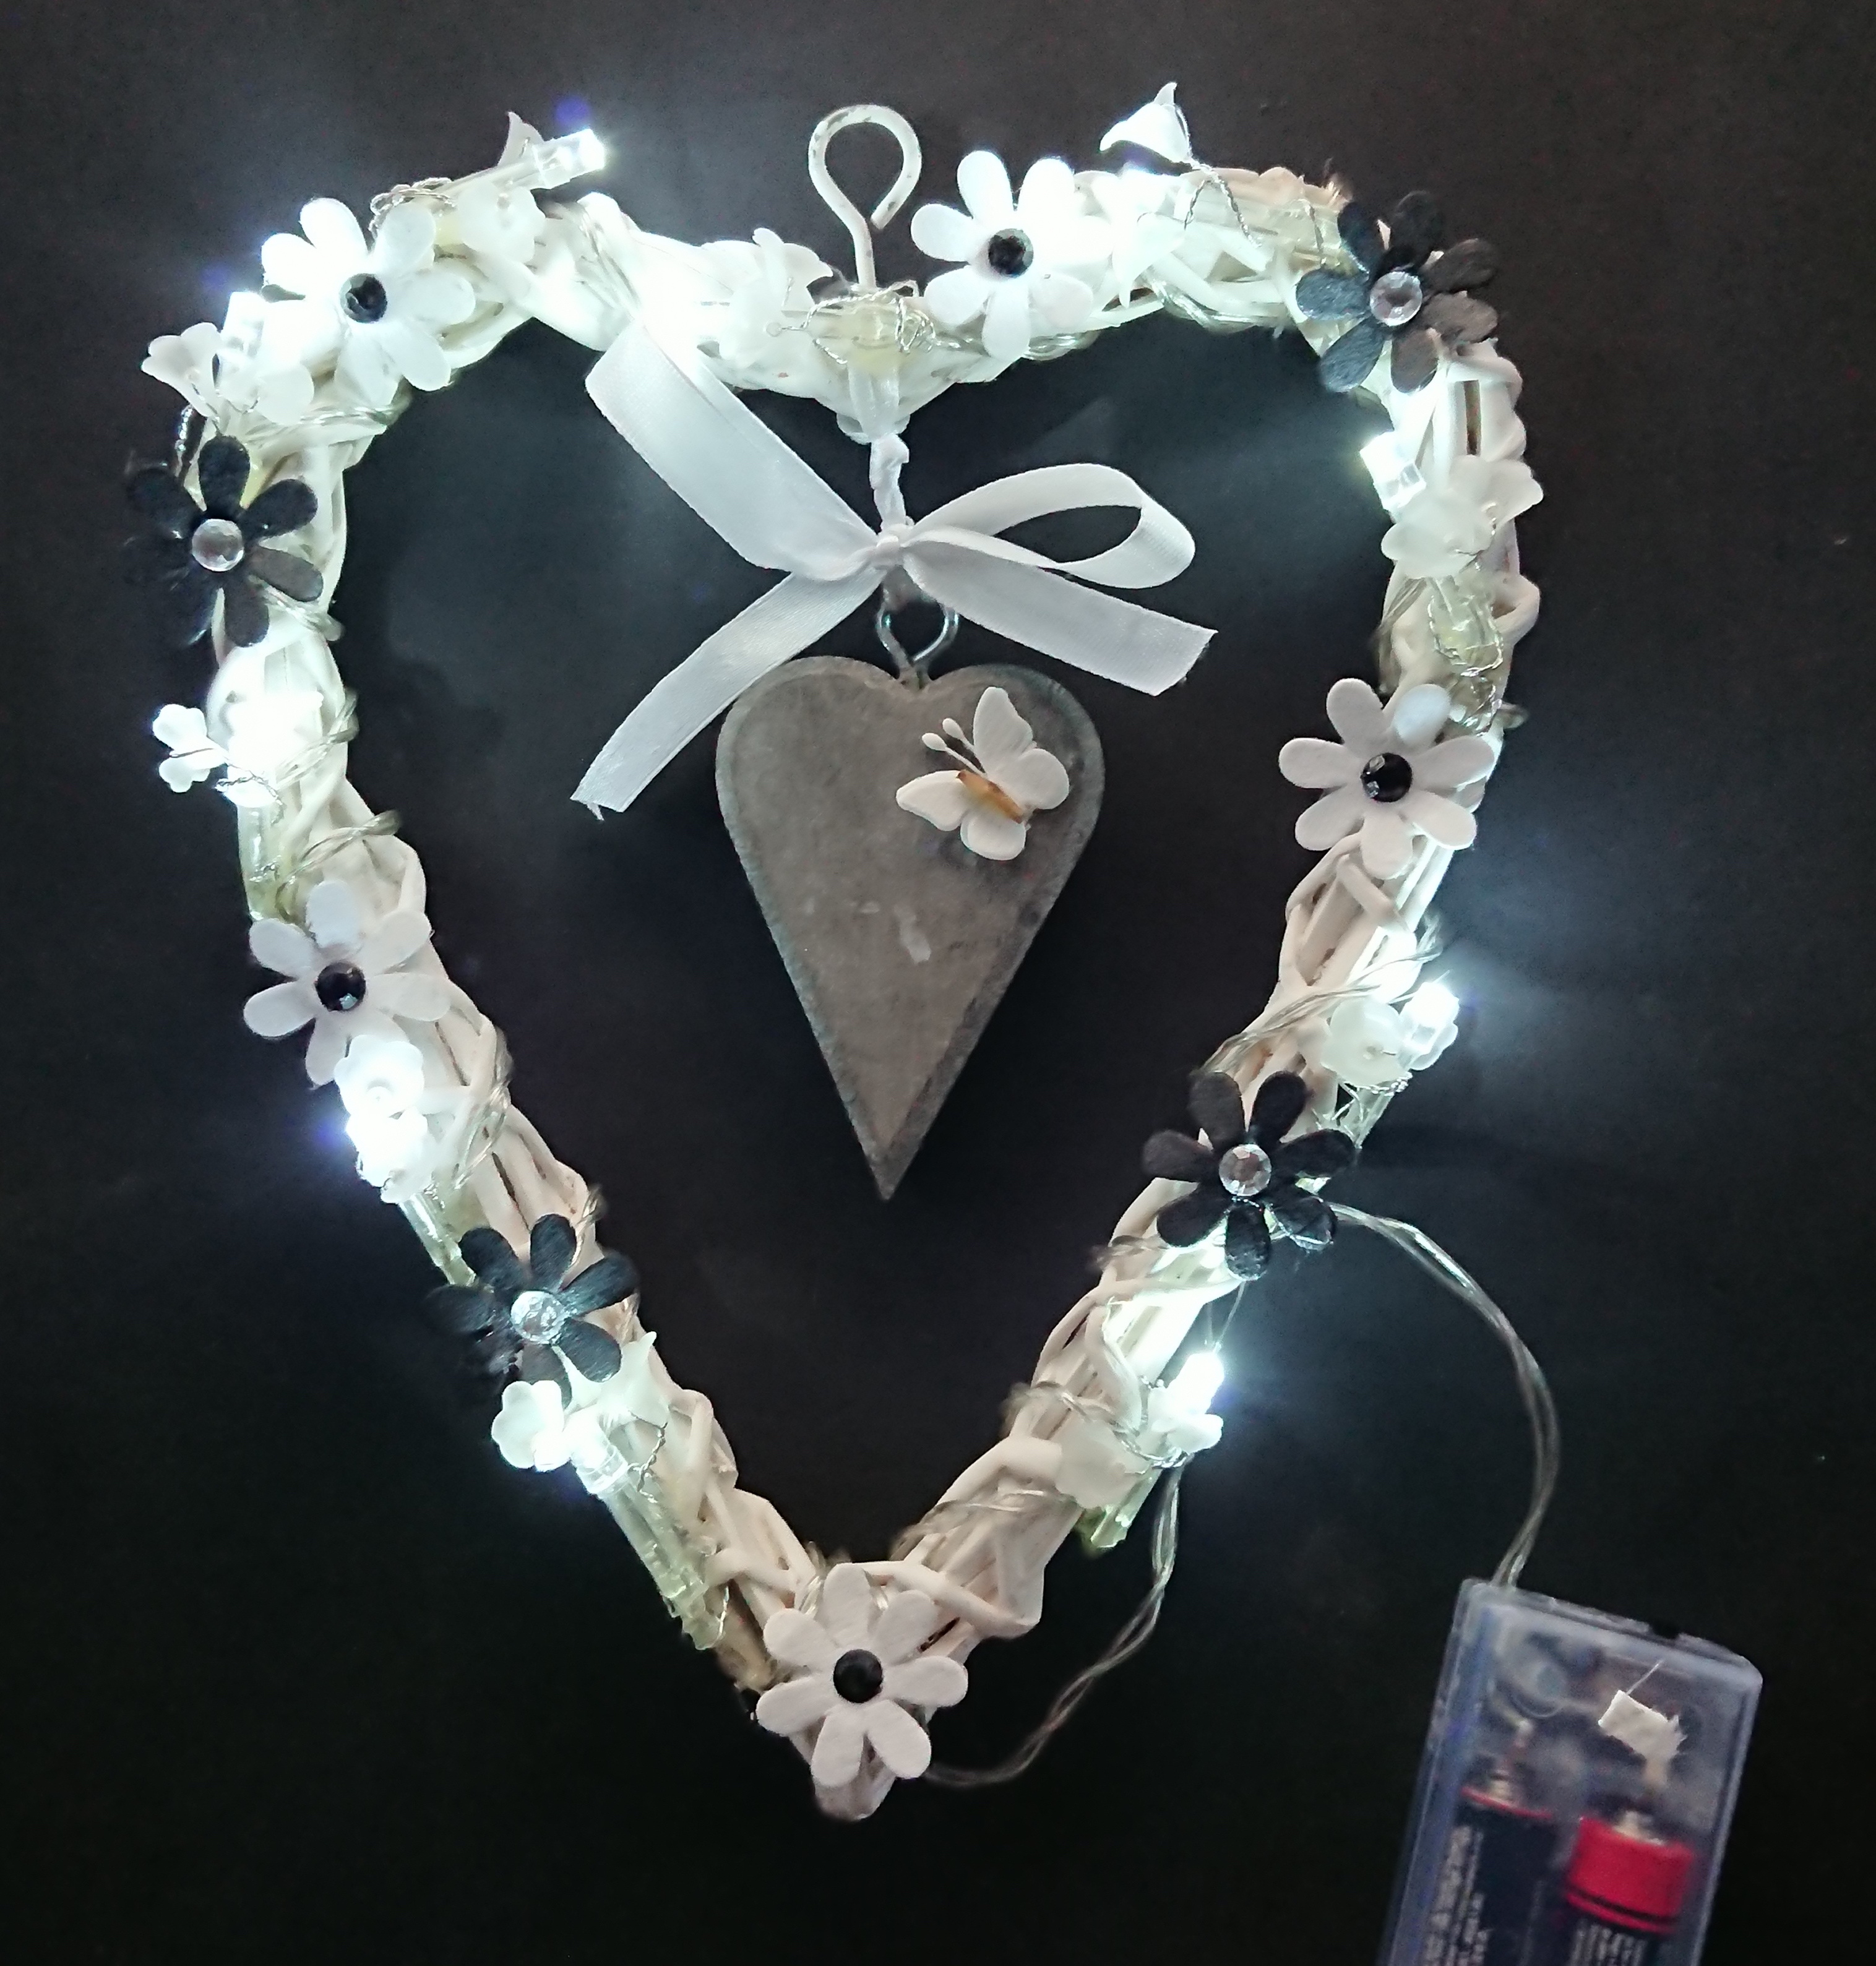 Small white heart with Black and white flowers (lit)